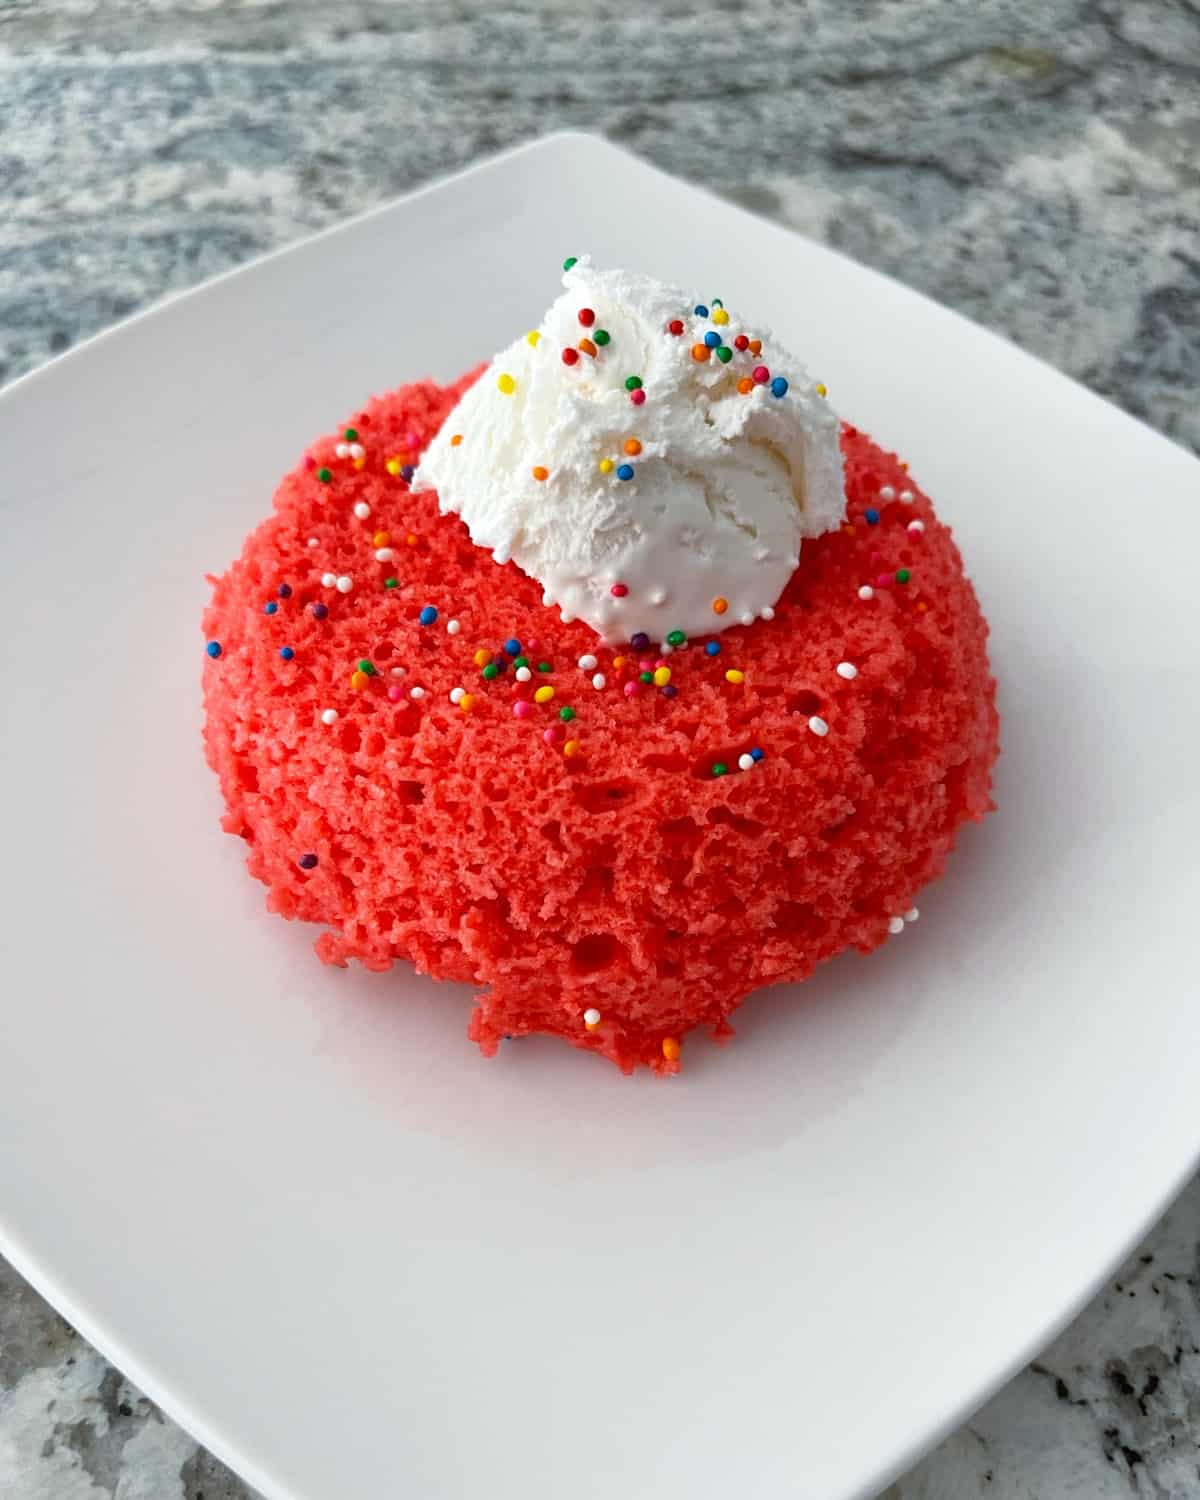 Raspberry Jell-o microwave mug cake topped with whipped topping and rainbow sprinkles on white plate.